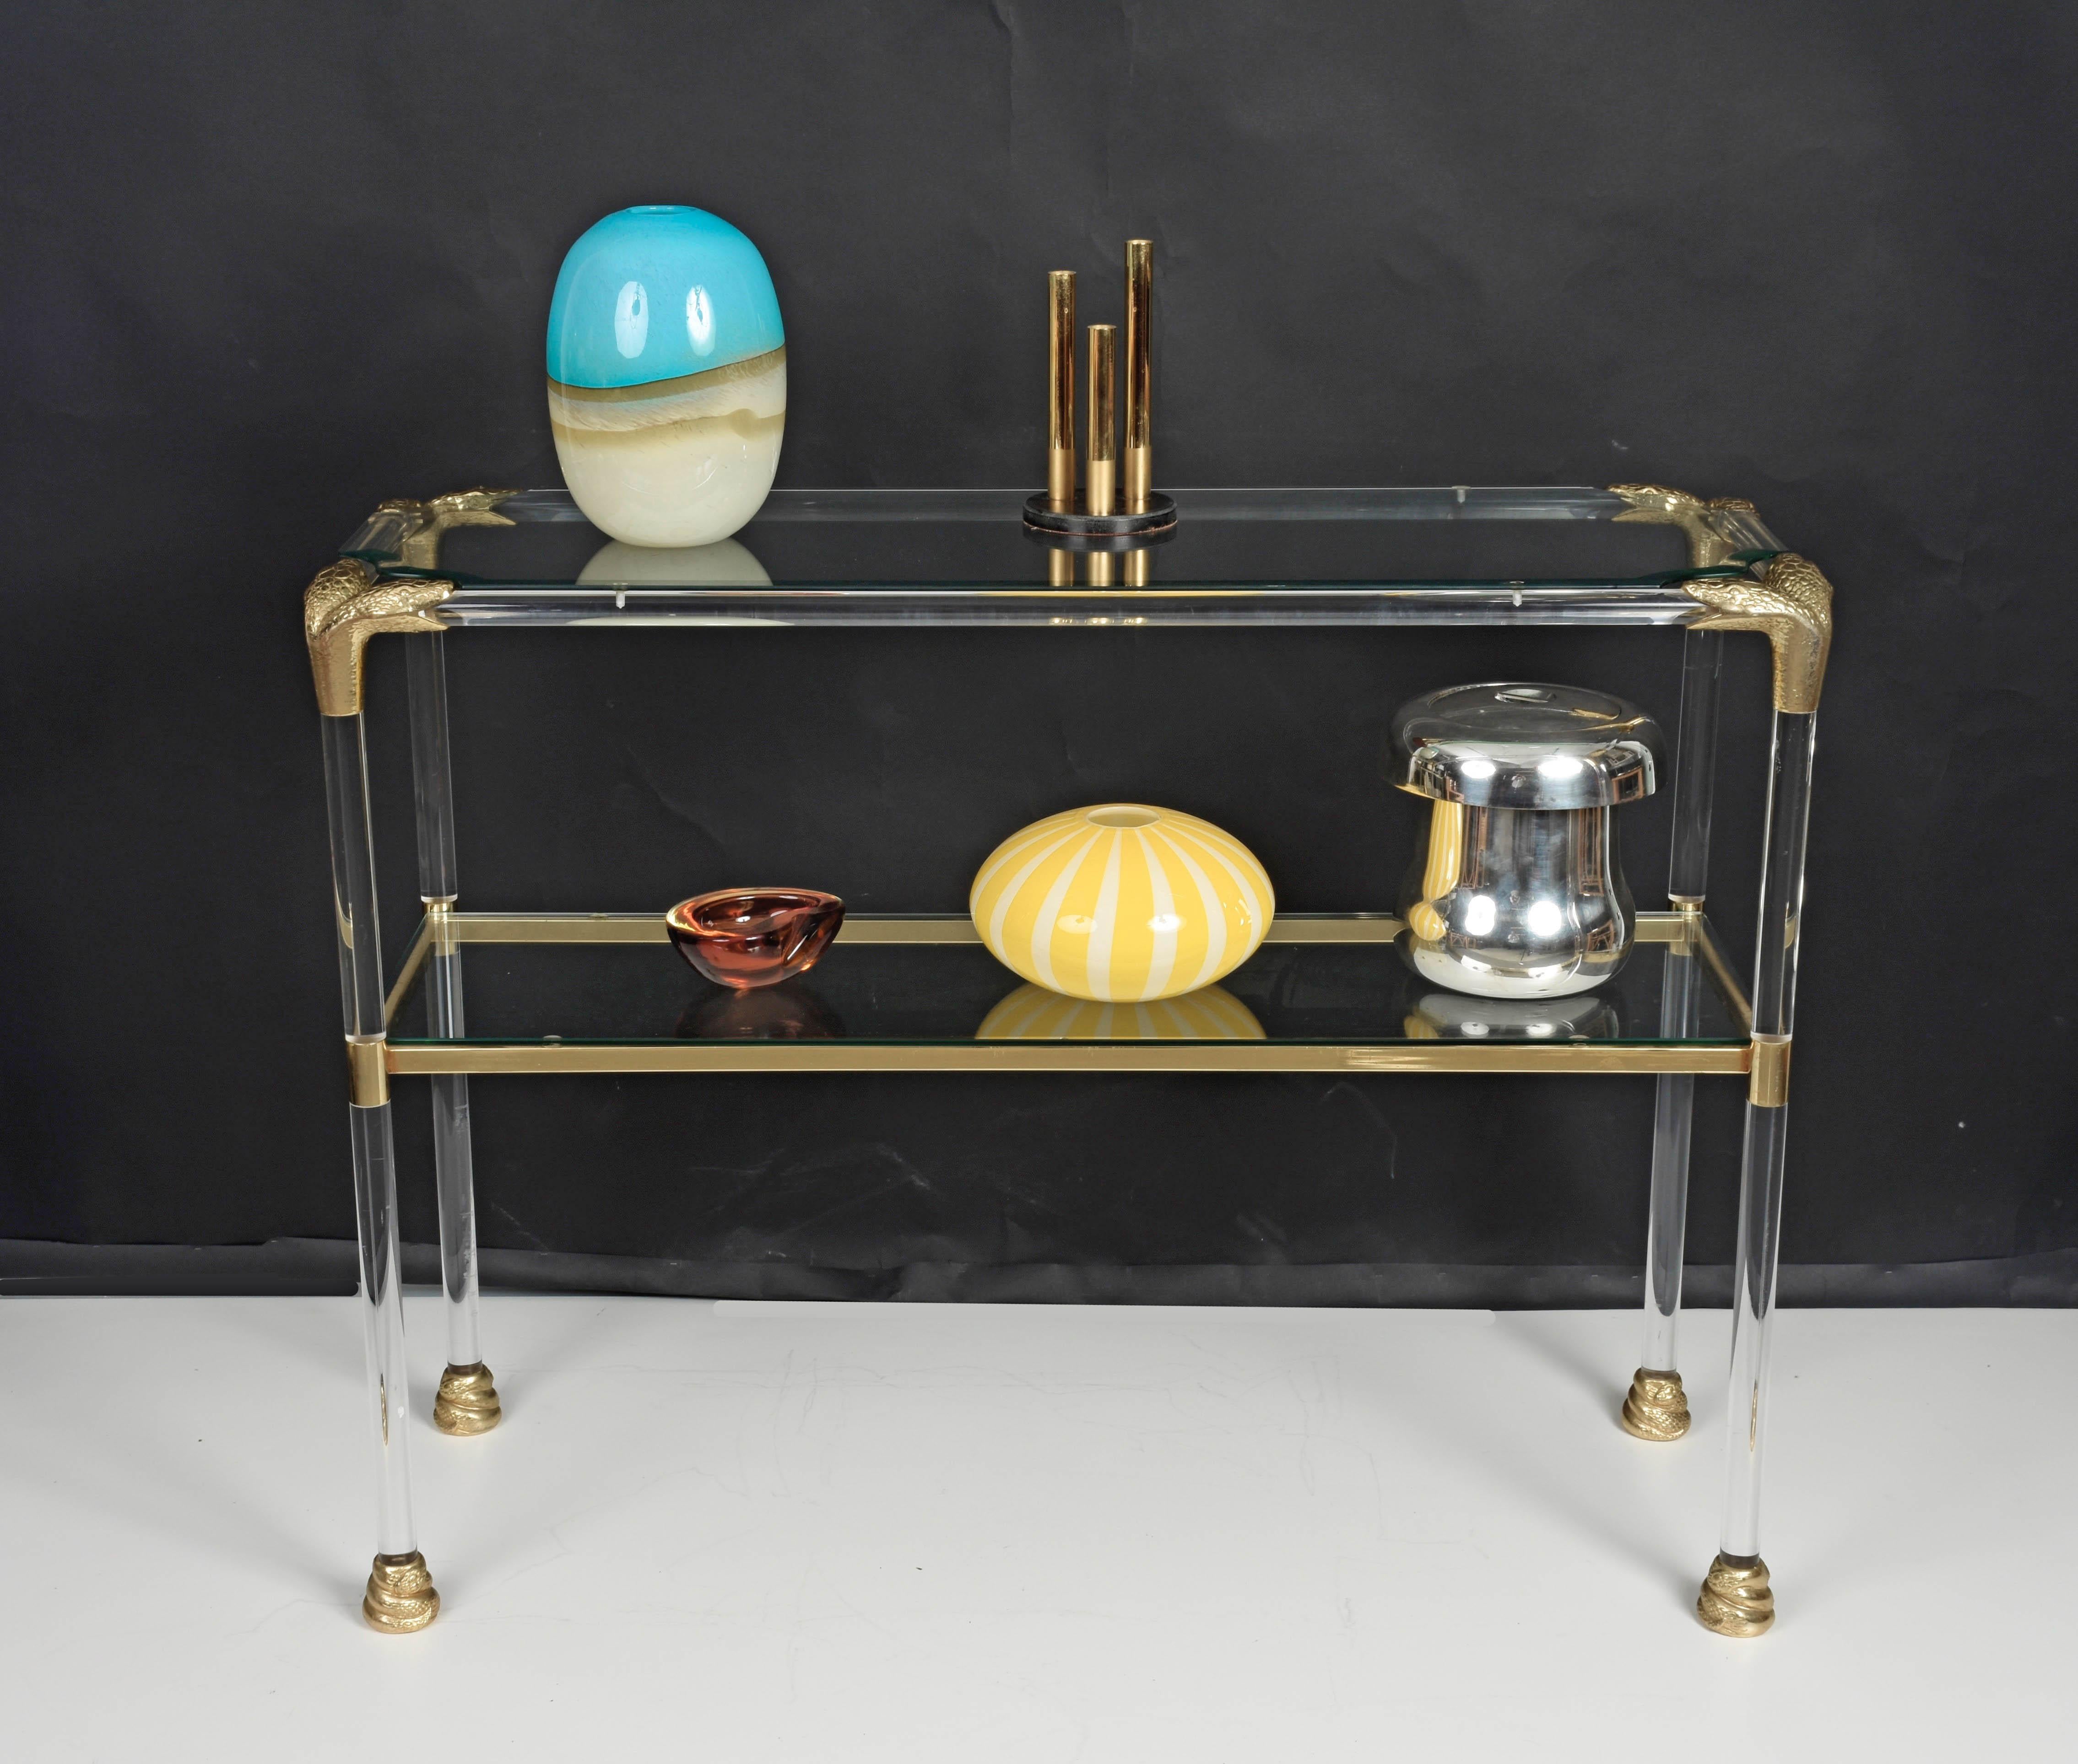 Midcentury Lucite and Brass Italian Console Table with Snake Head Finishes 1970s 3